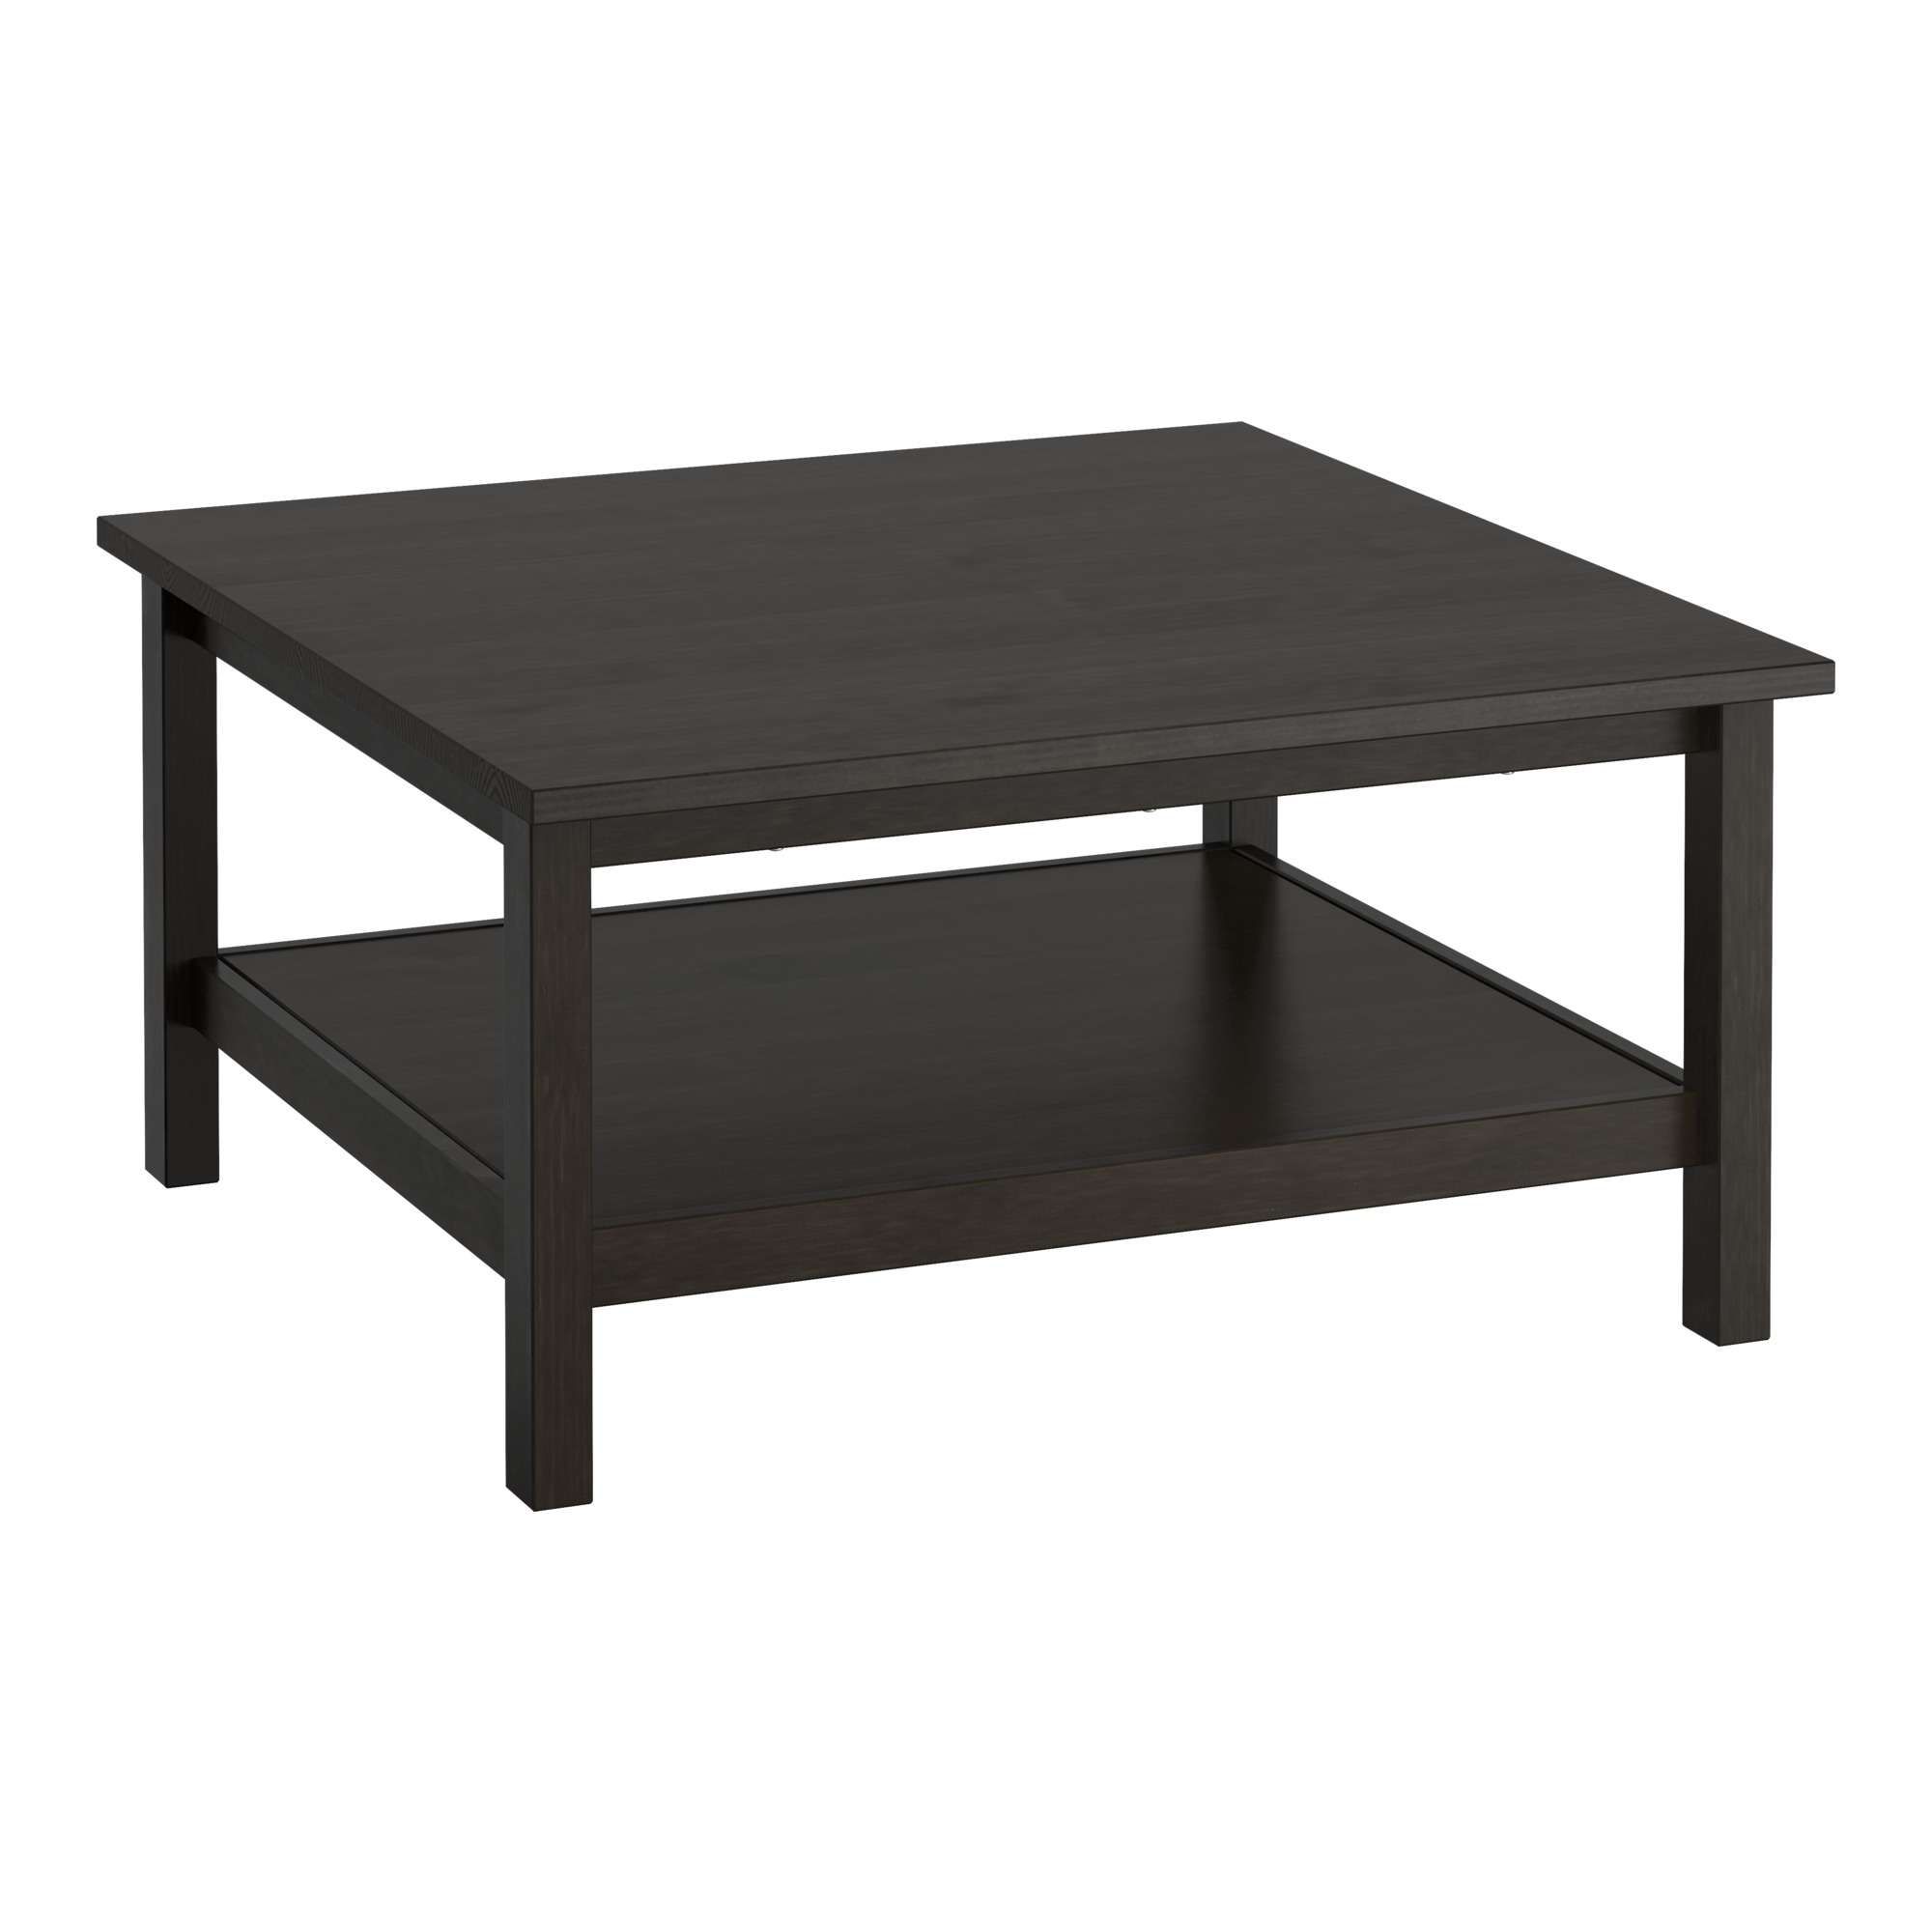 Favorite Dark Wood Square Coffee Tables Regarding Coffee Tables – Glass & Wooden Coffee Tables – Ikea (View 2 of 20)